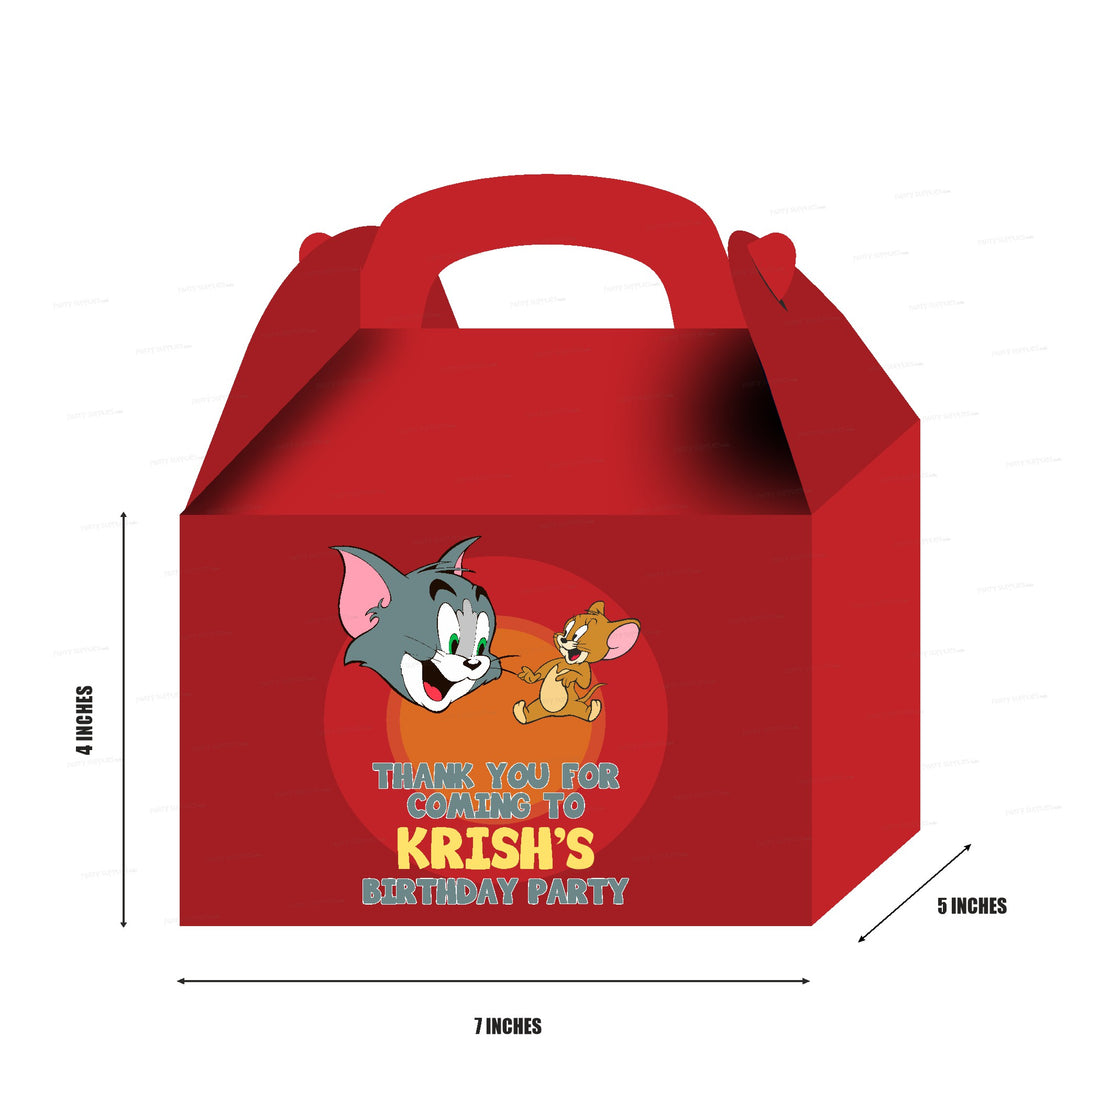 PSI Tom &amp; Jerry Theme Goodie Return Gift Boxes